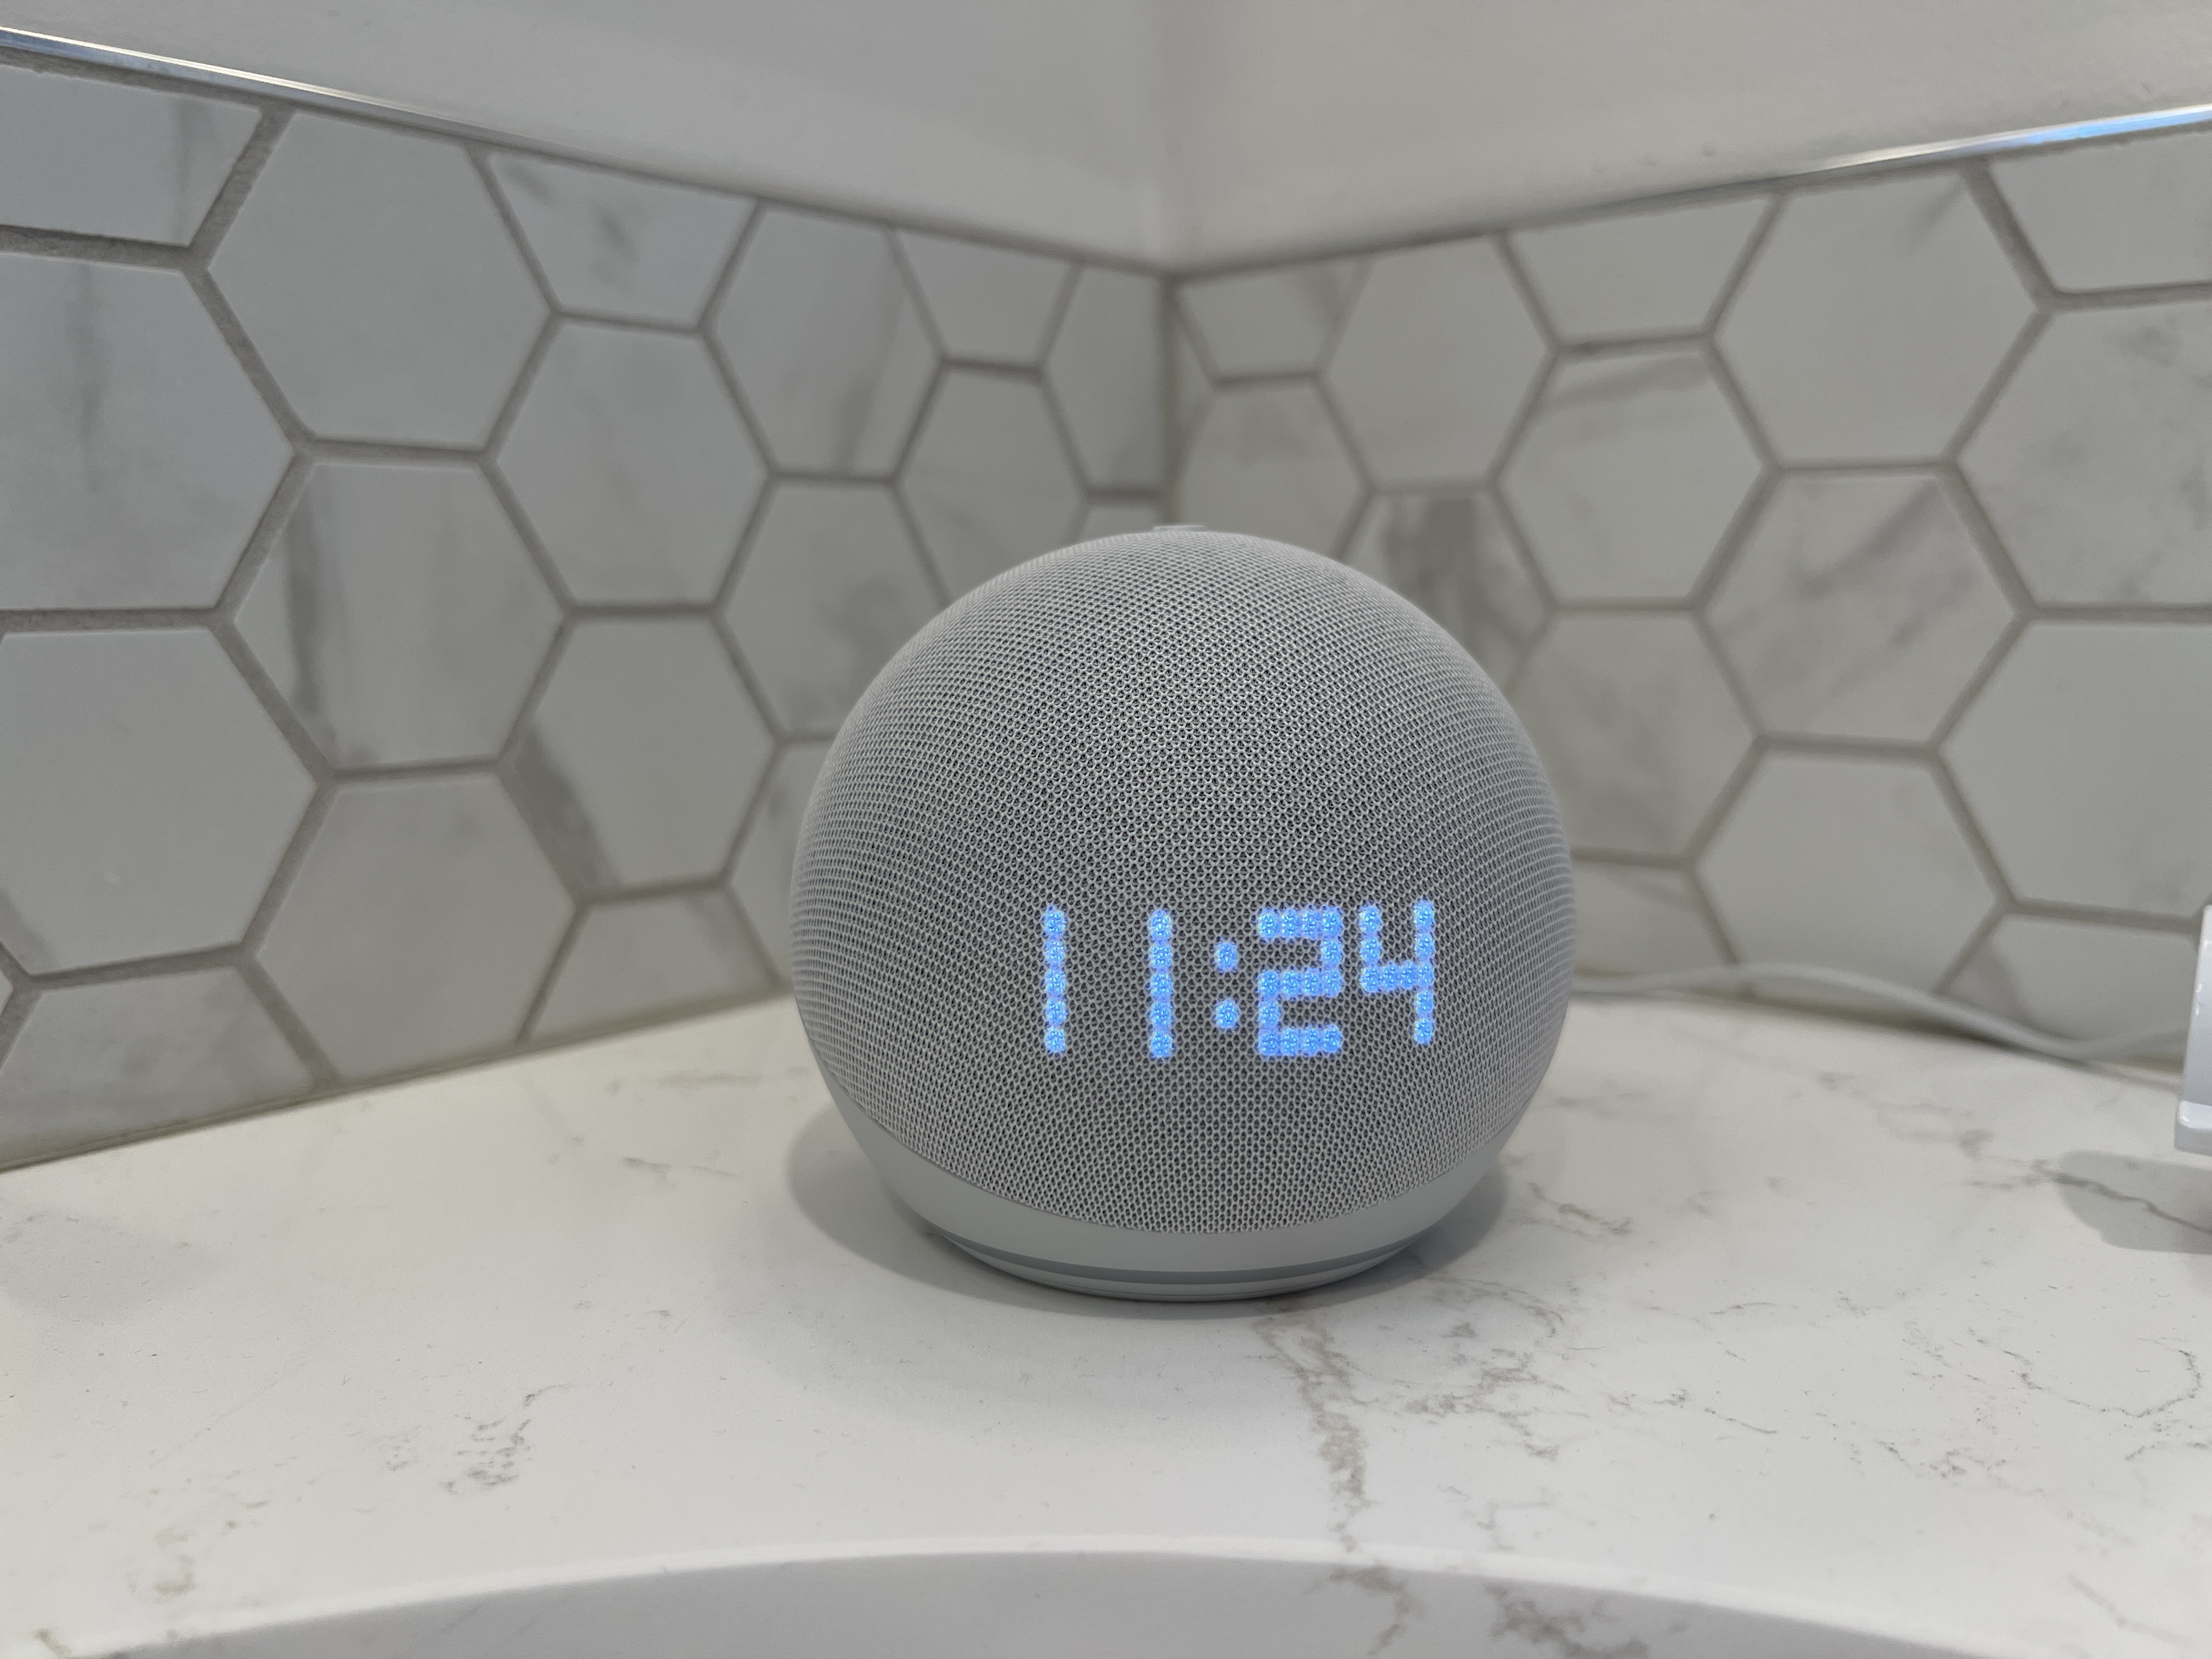 2022 amazon echo dot with clock review 5. nesil digitaltrends 2022img 0535